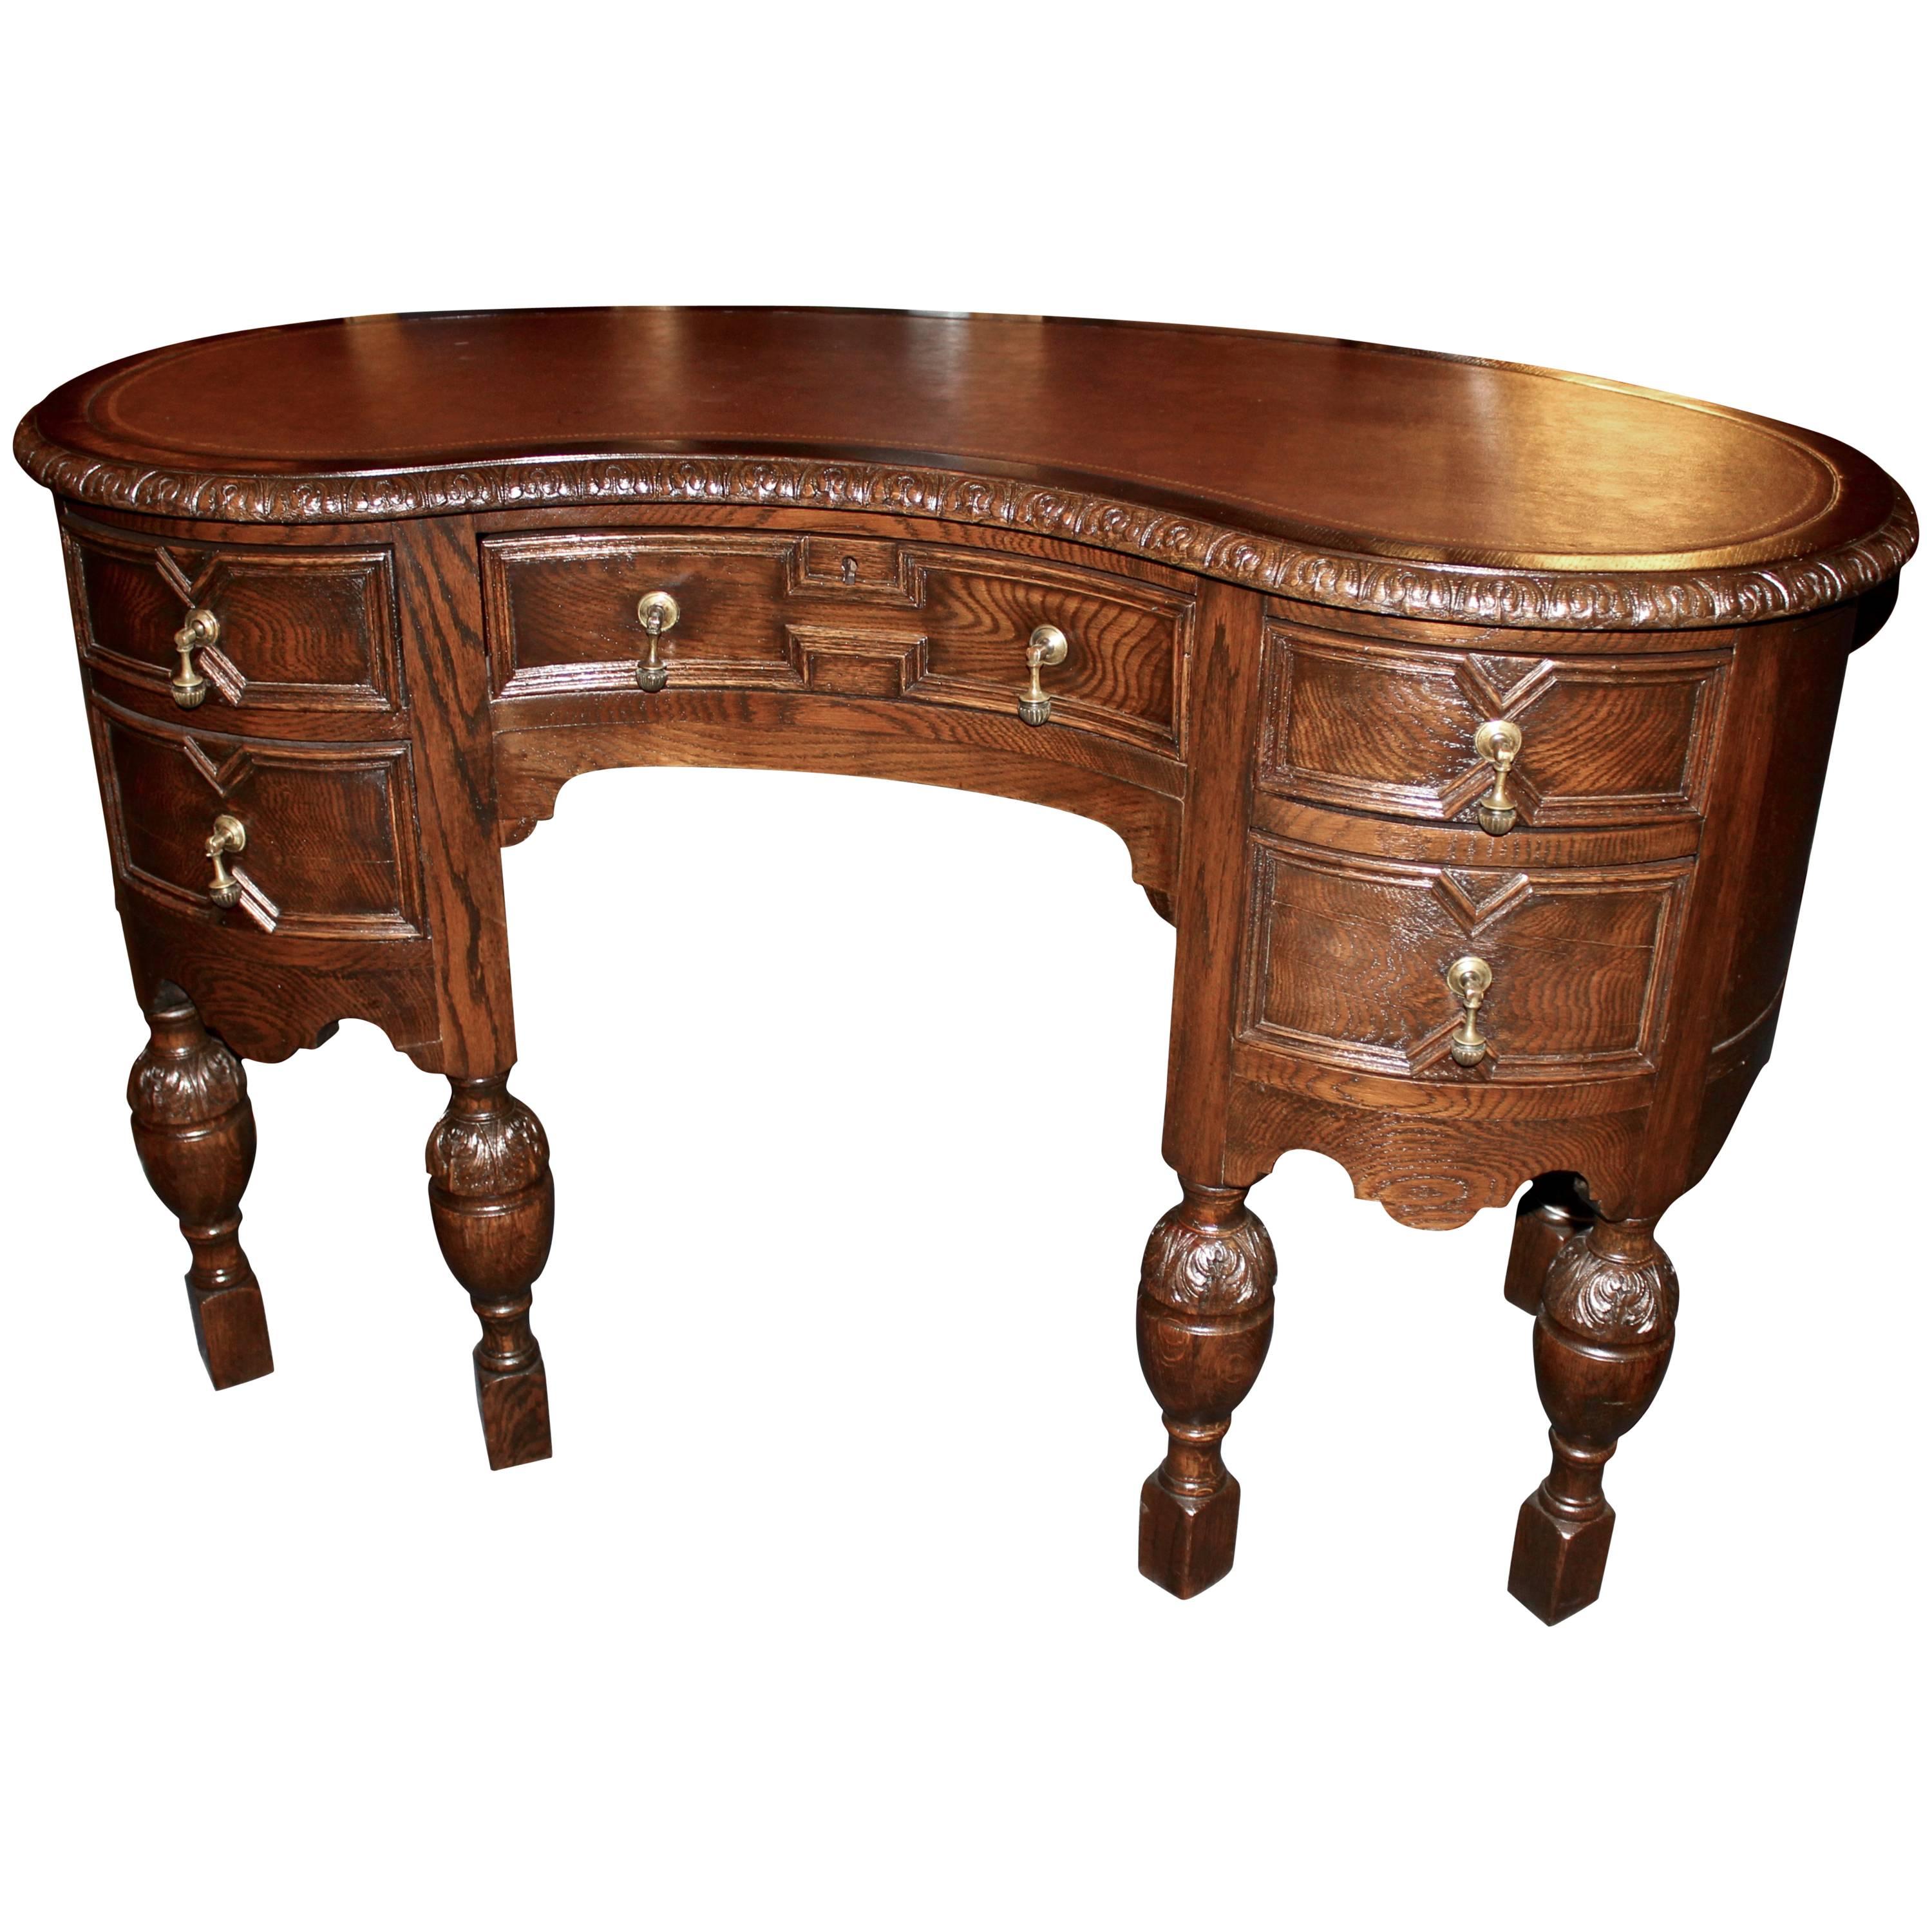 Early 20th Century English Jacobean Kidney Desk For Sale